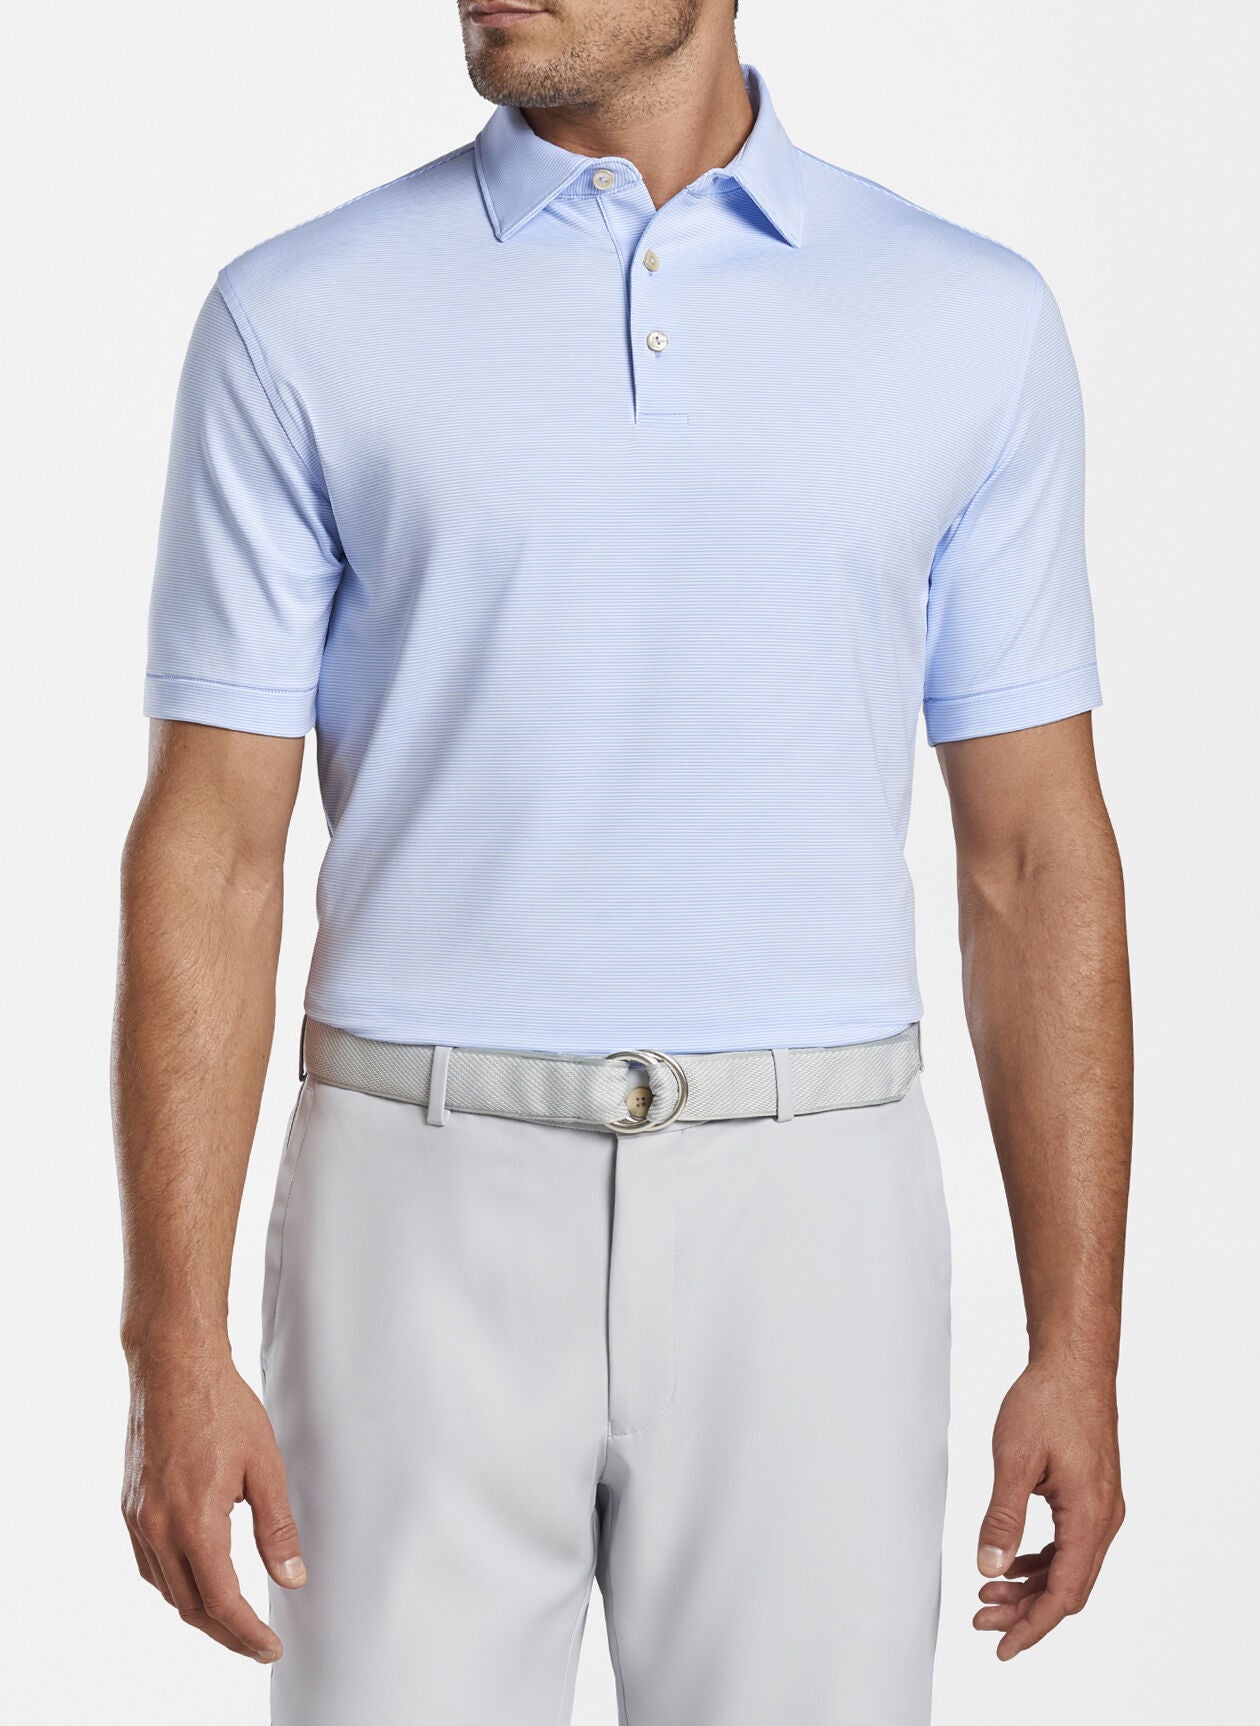 JUBILEE PERFORMANCE POLO - COTTAGE BLUE